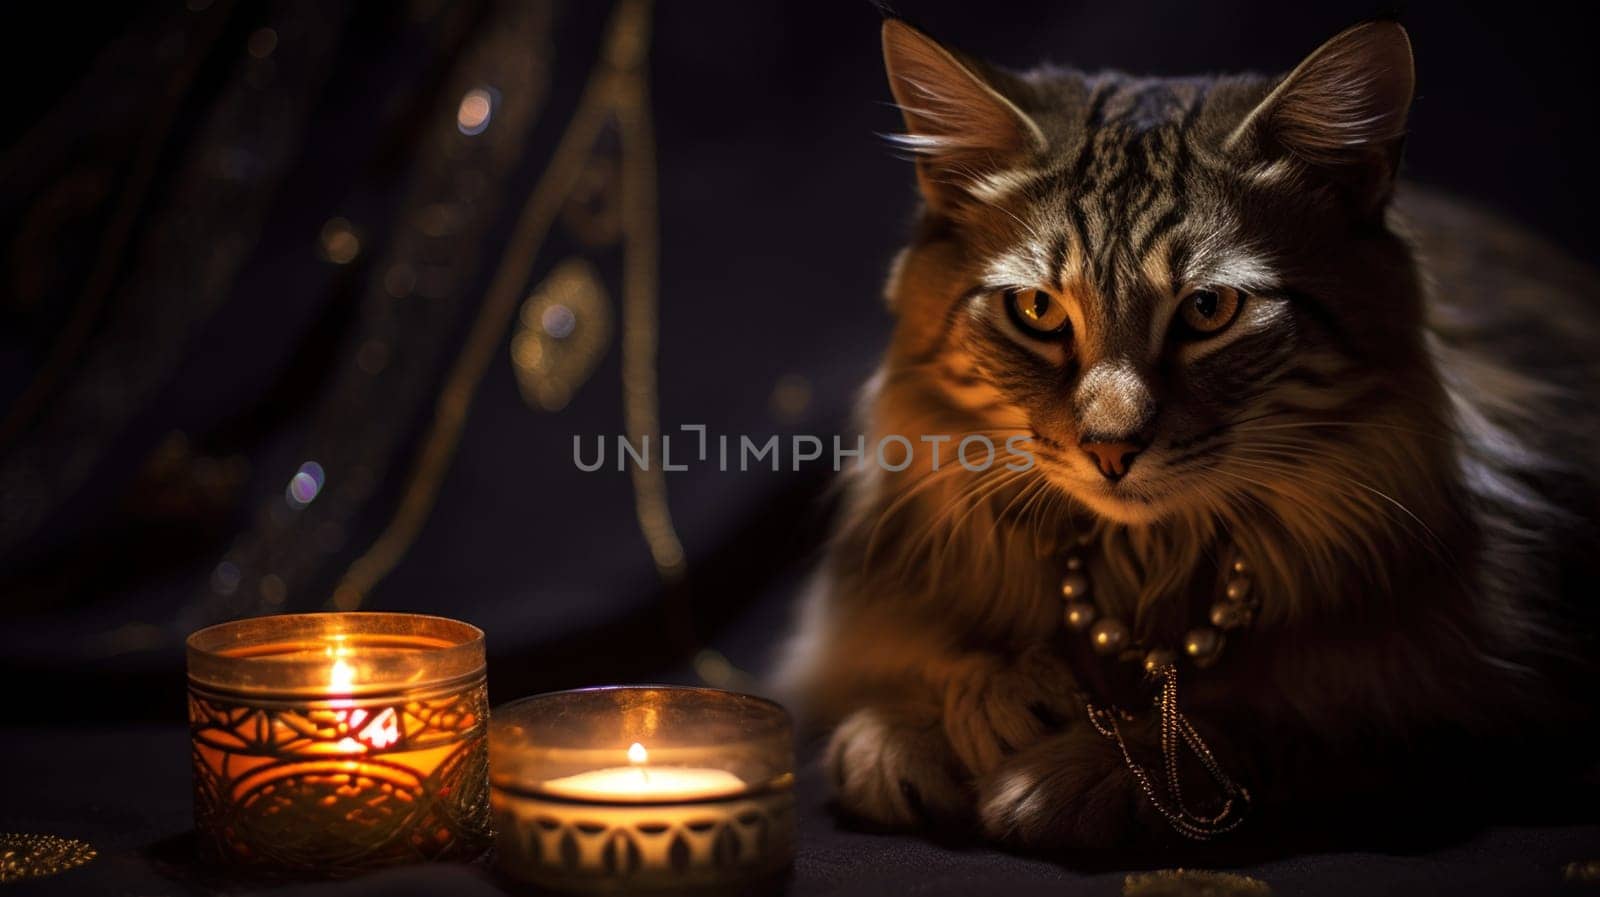 A cat sitting next to a candle and two other candles, AI by starush